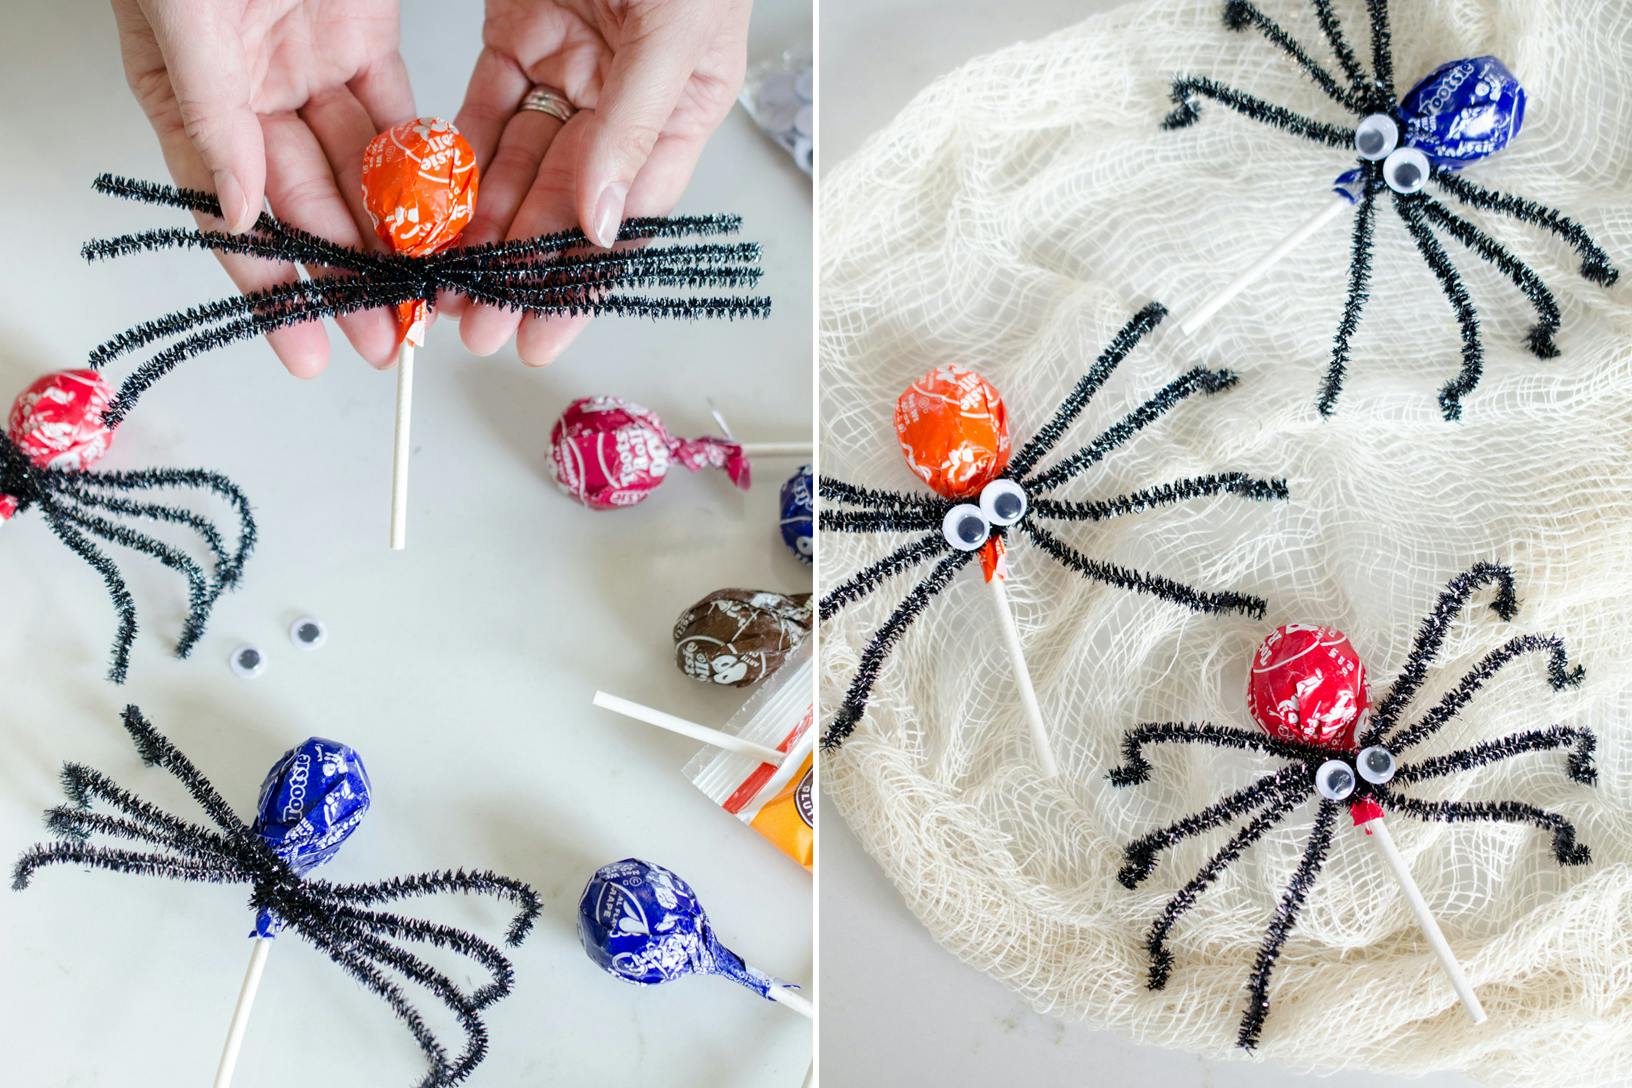 Pipe cleaners being twisted around a lollipop candy.